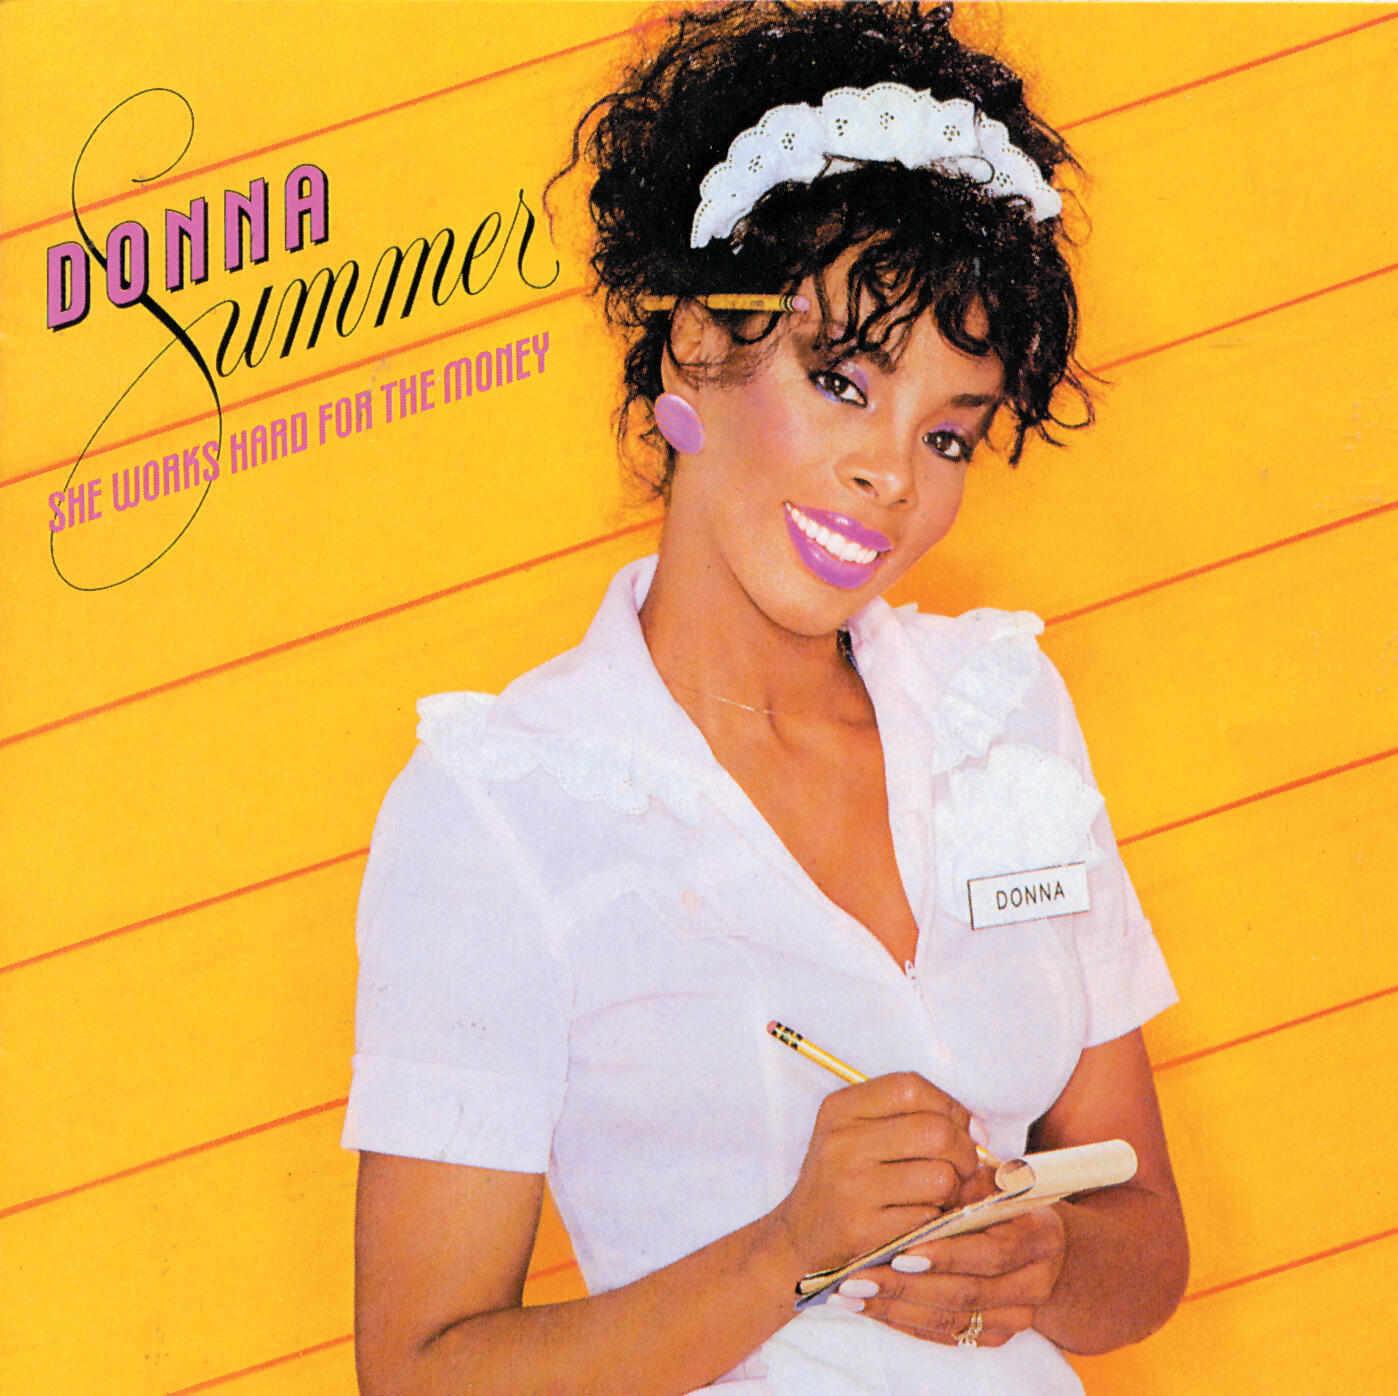 Listen Free to Donna Summer - She Works Hard For The Money Radio